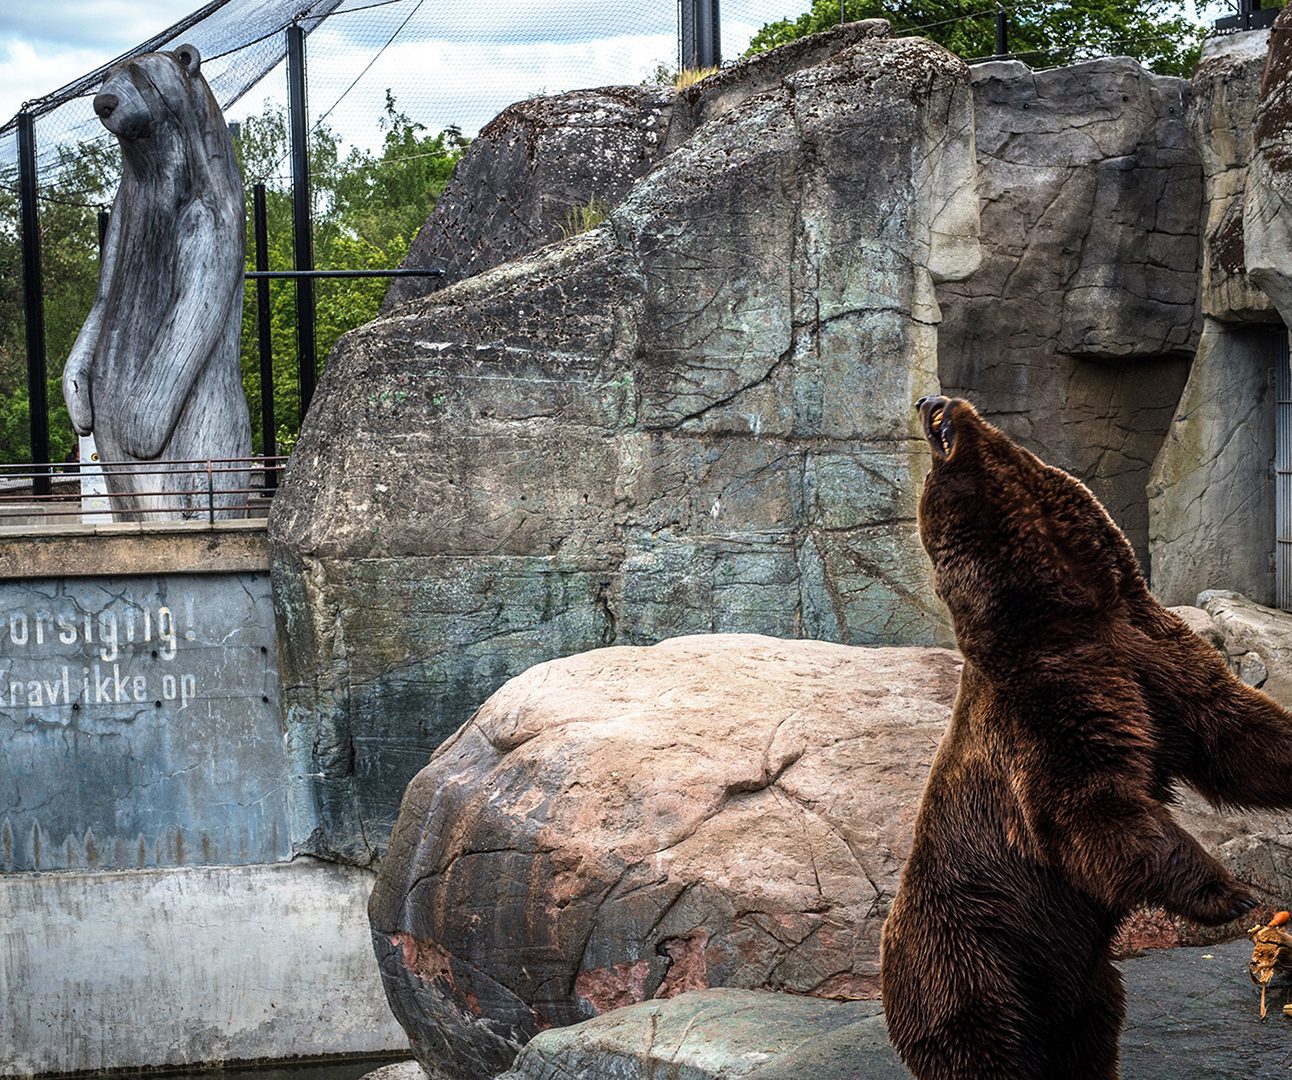 A brown bear in a zoo enclosure stood on hind legs twisting its neck